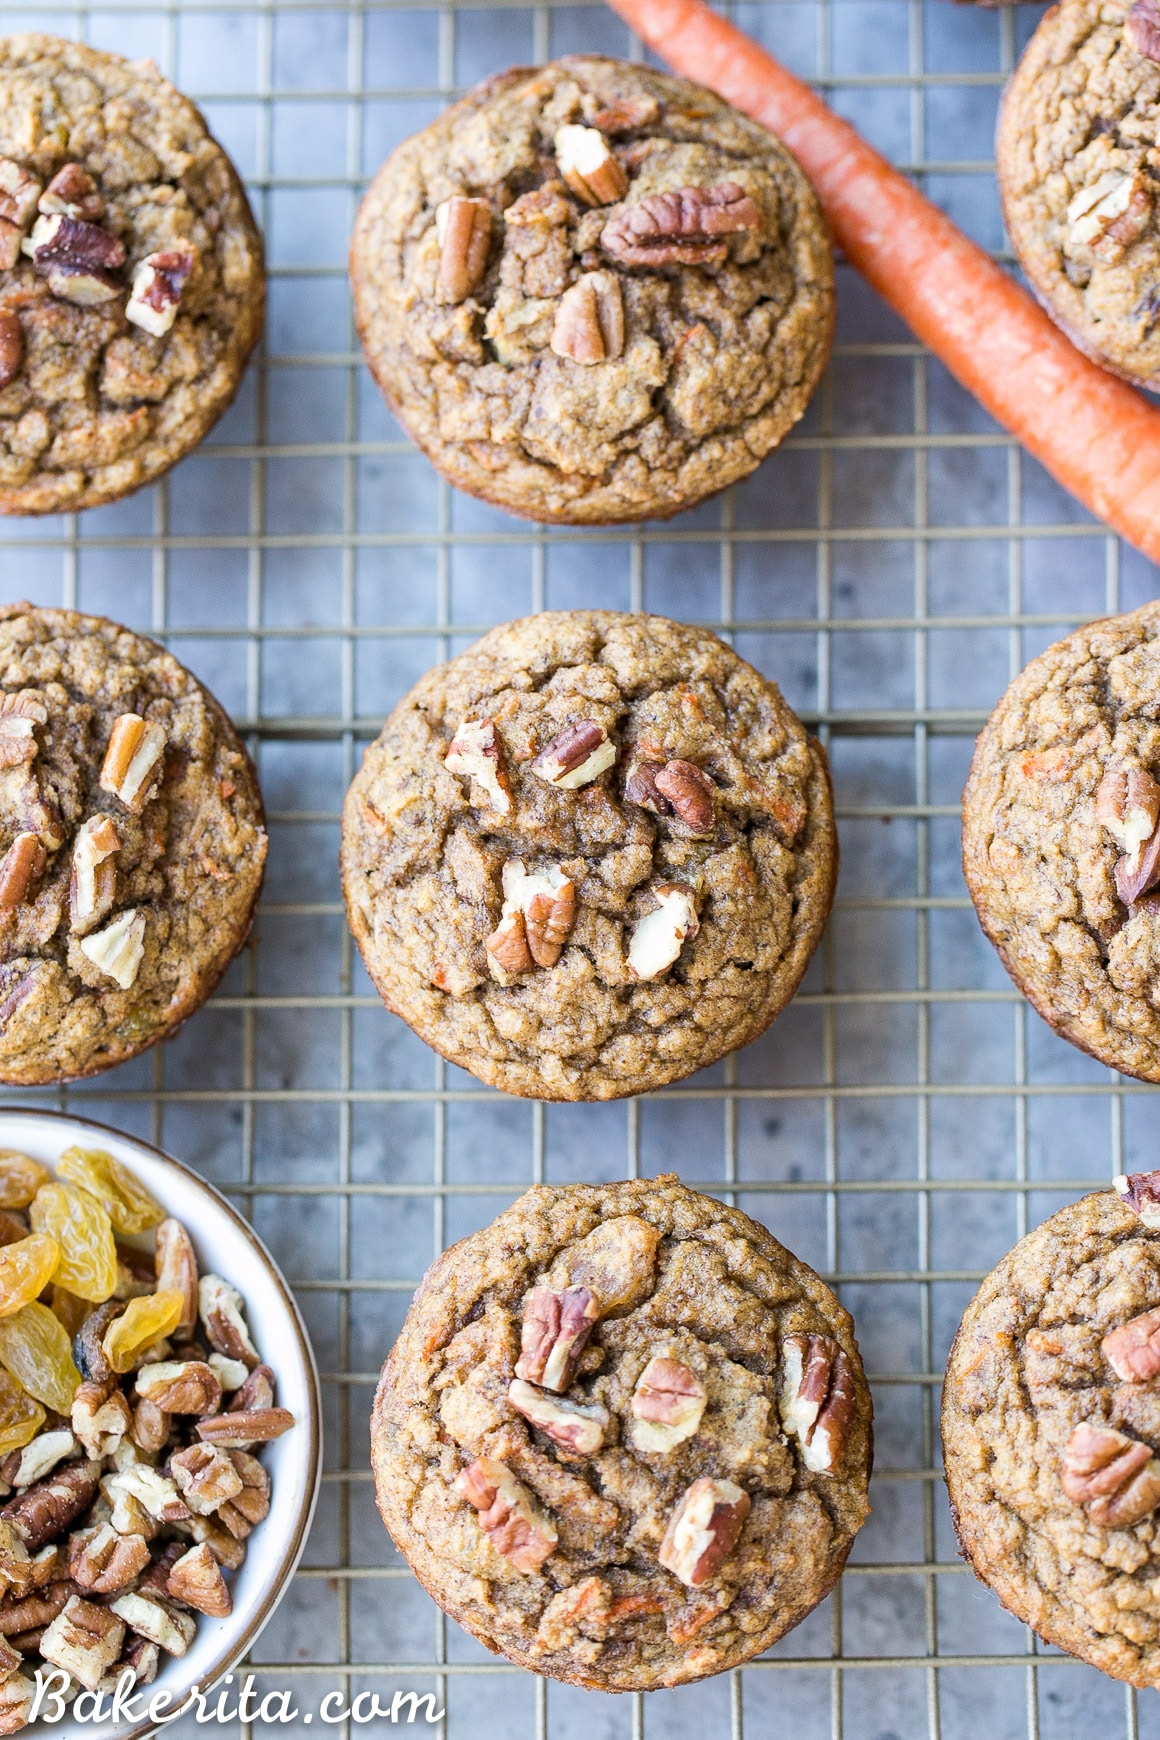 These Paleo Morning Glory Muffins are loaded with bananas, shredded carrots, toasted walnuts, and golden raisins. These easy muffins have NO added sugar - they're sweetened entirely with bananas! They're the perfect on-the-go breakfast or snack.